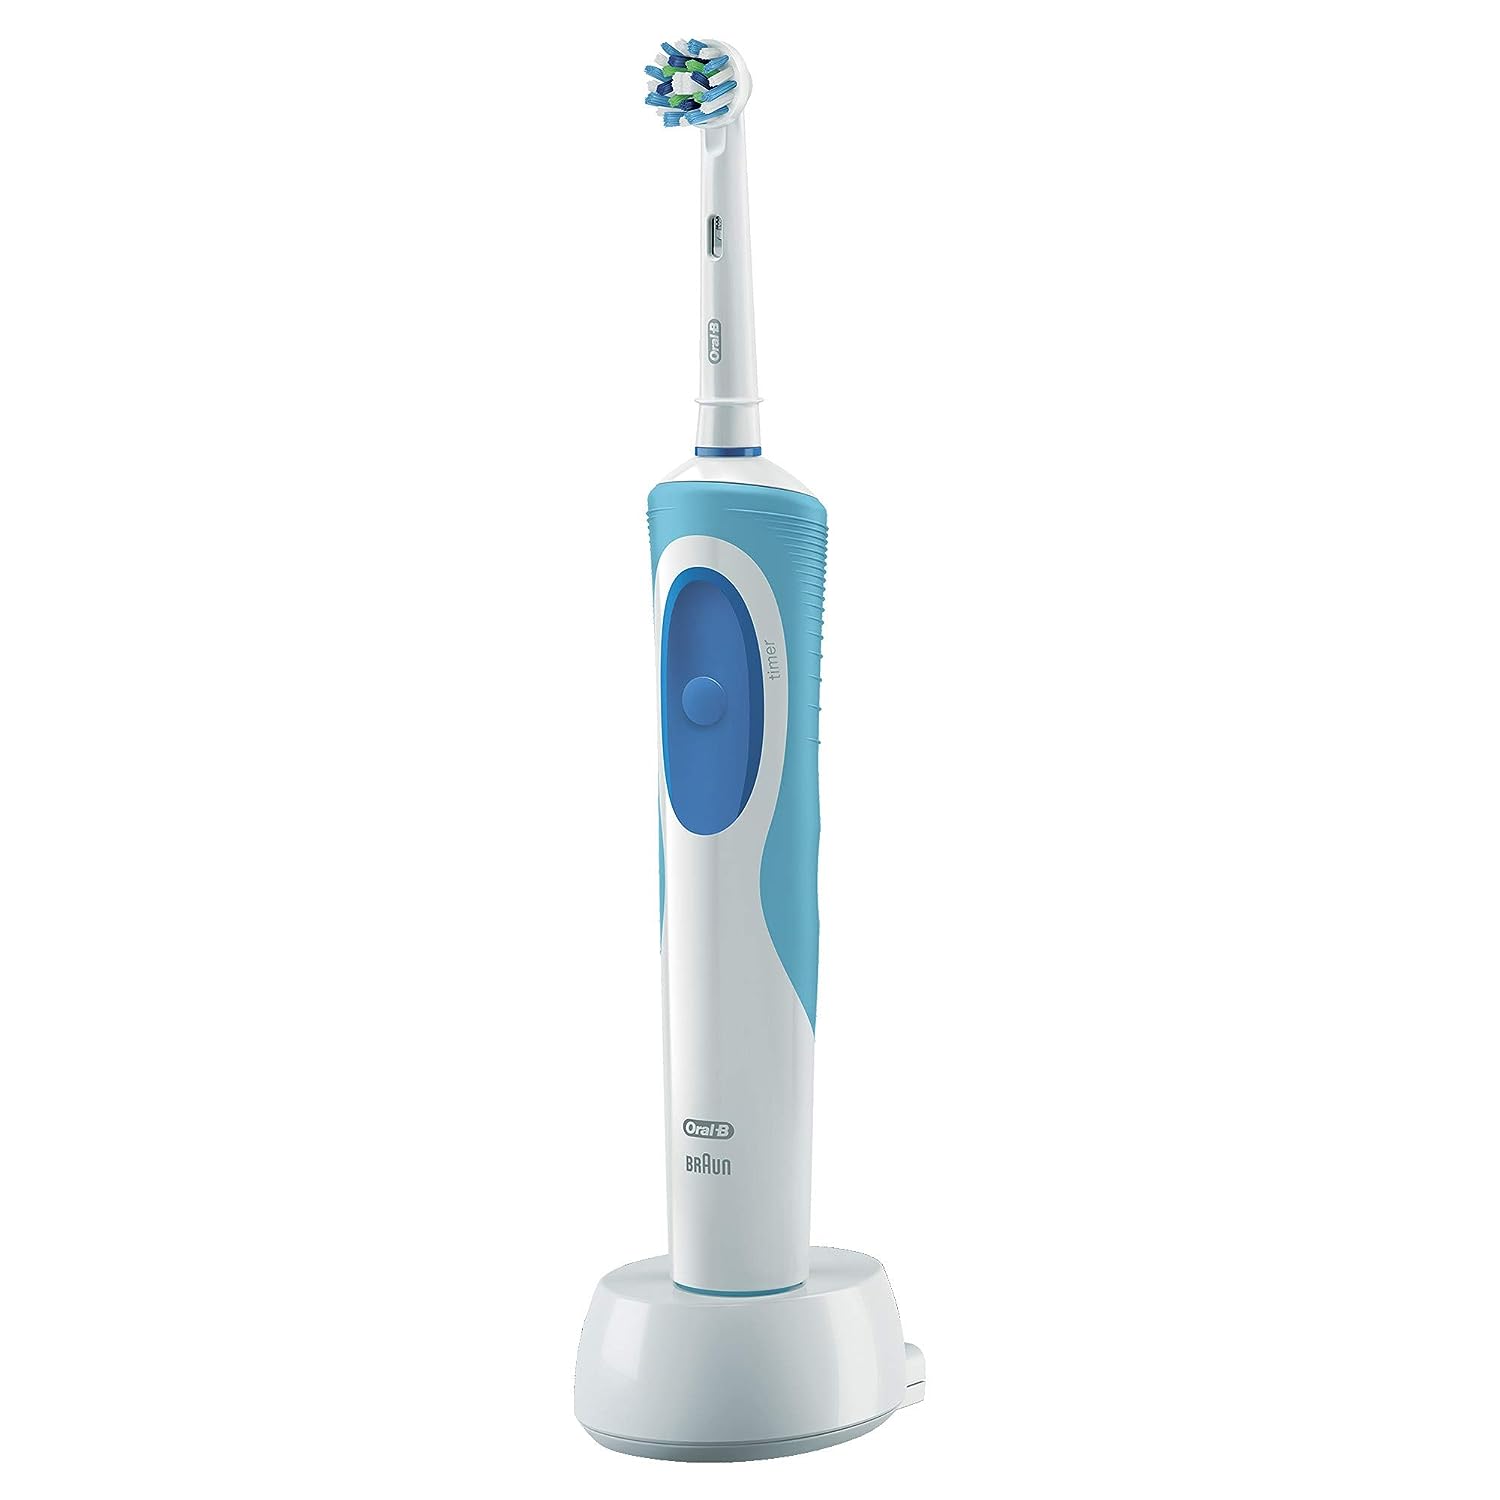 Oral B Vitality White and Clean Electric Rechargeable Toothbrush Anniversary Gift Pack